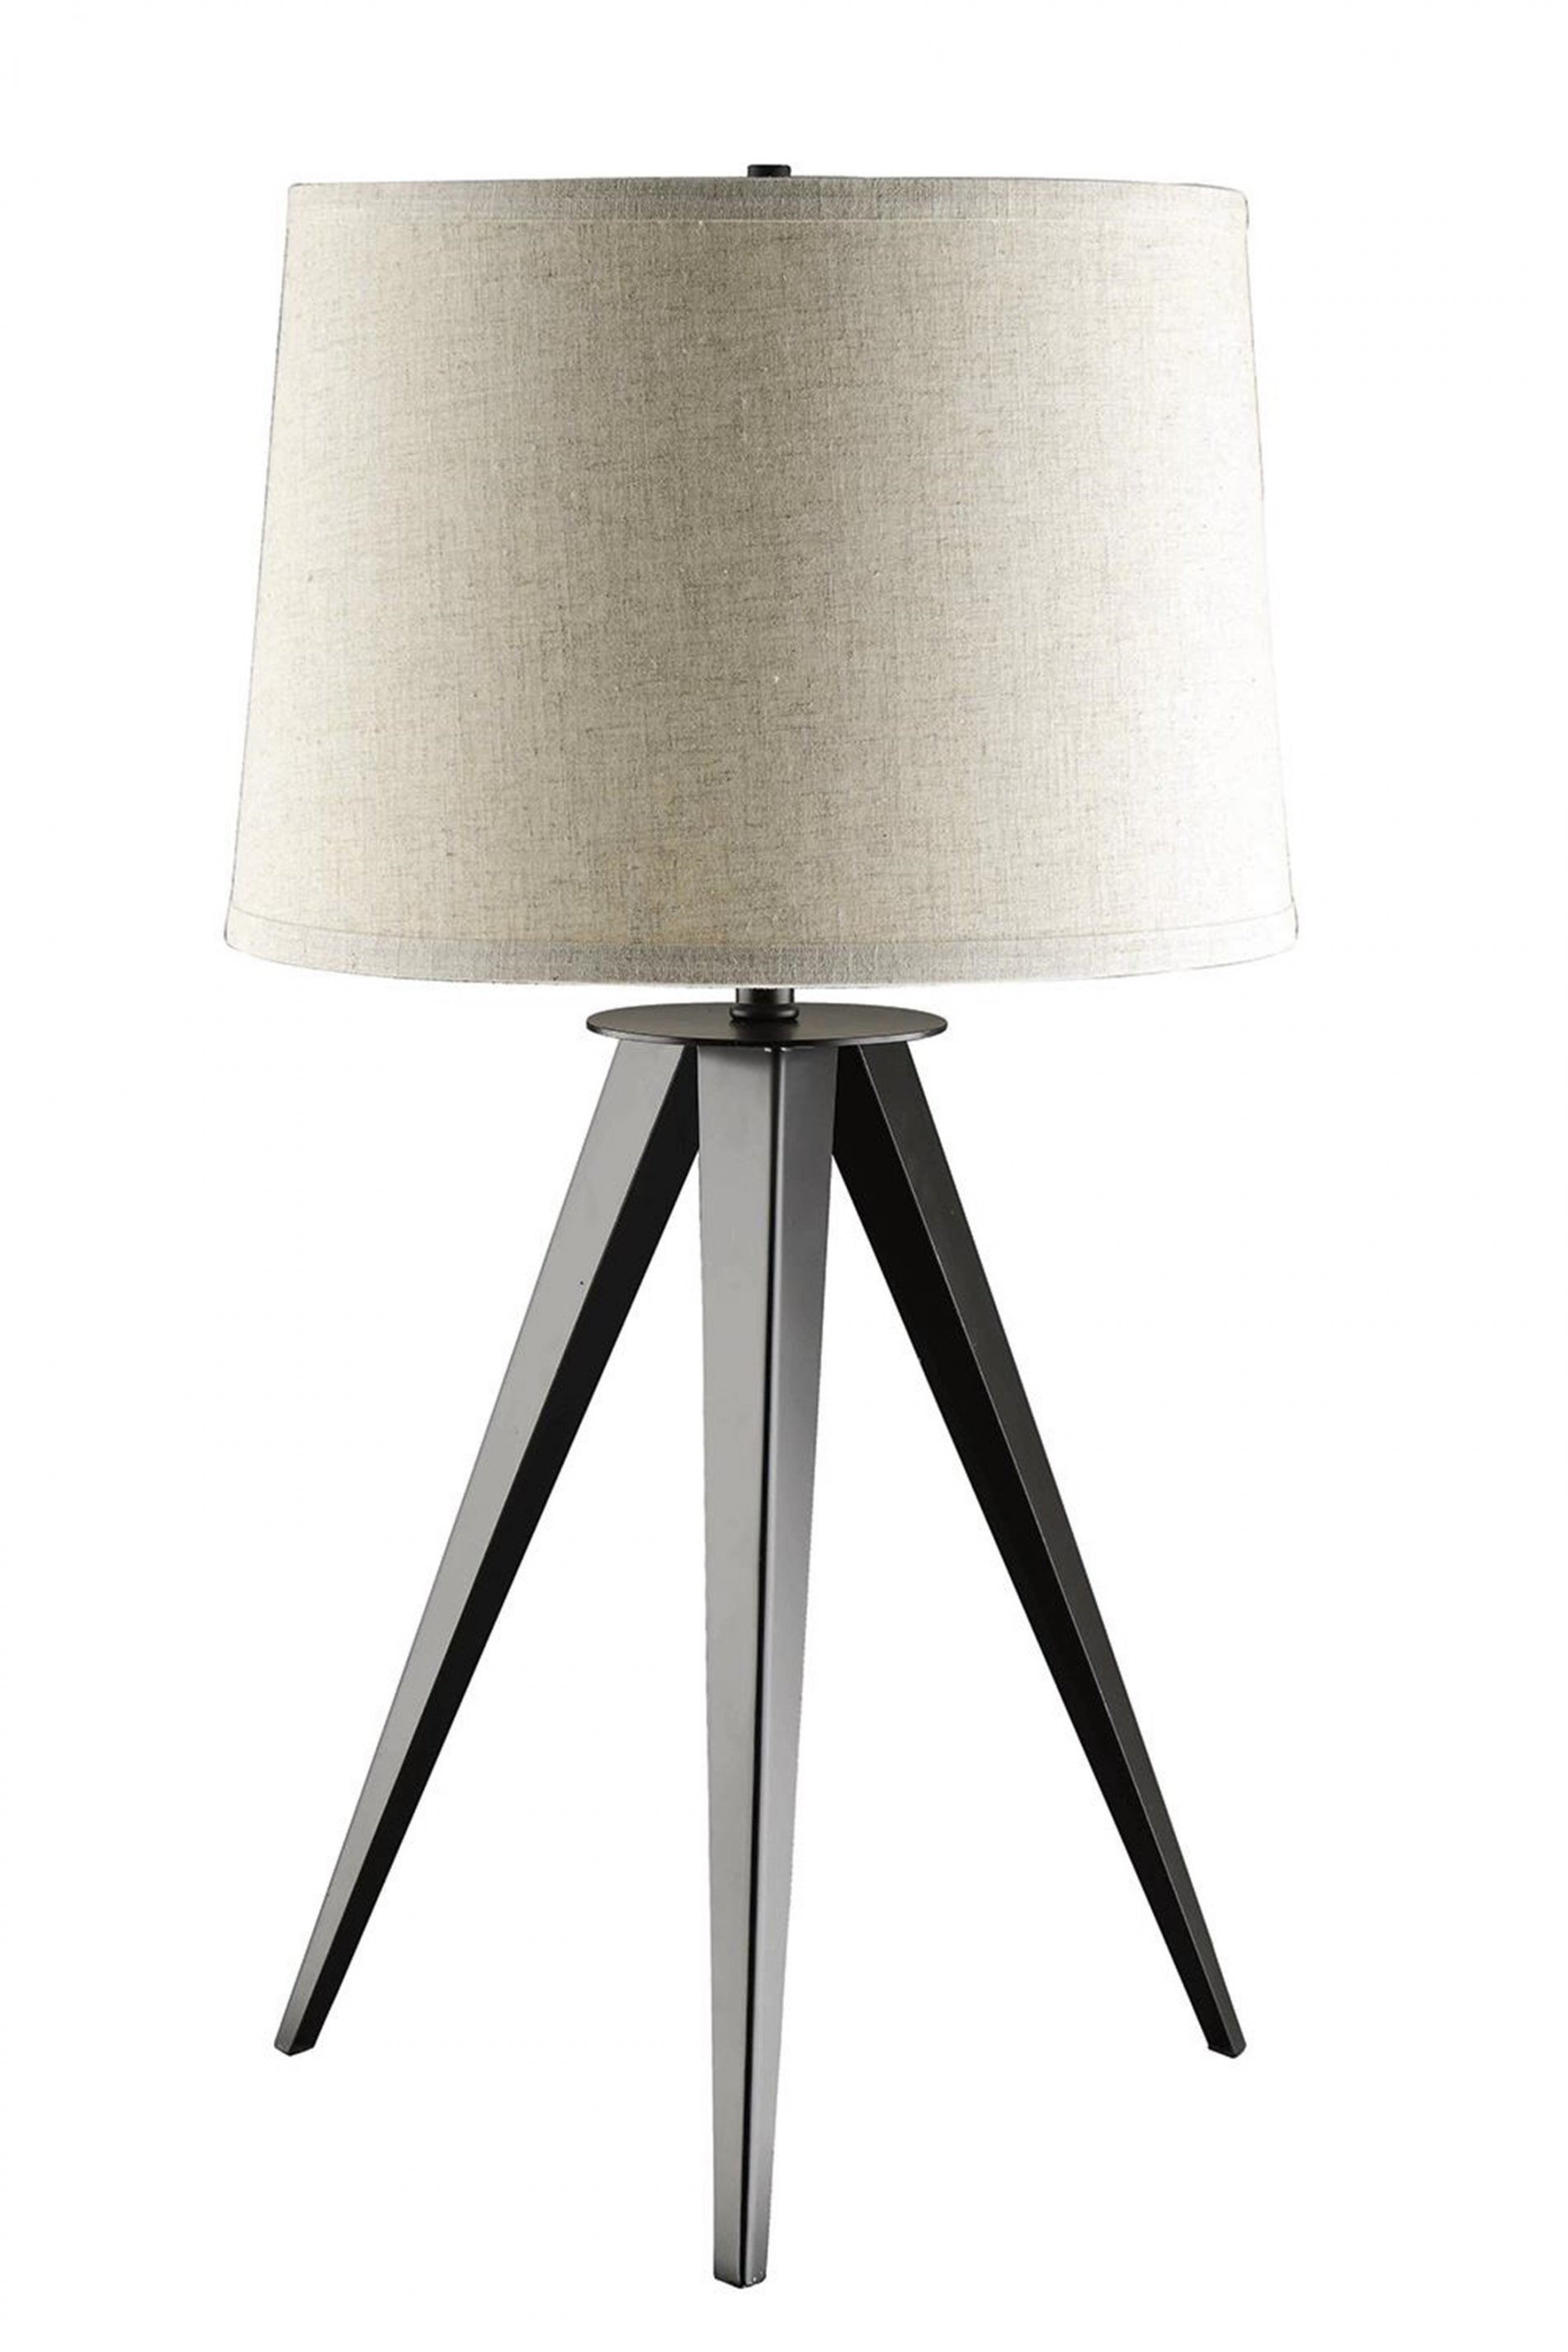 Industrial Tripod Table Lamp - Click Image to Close